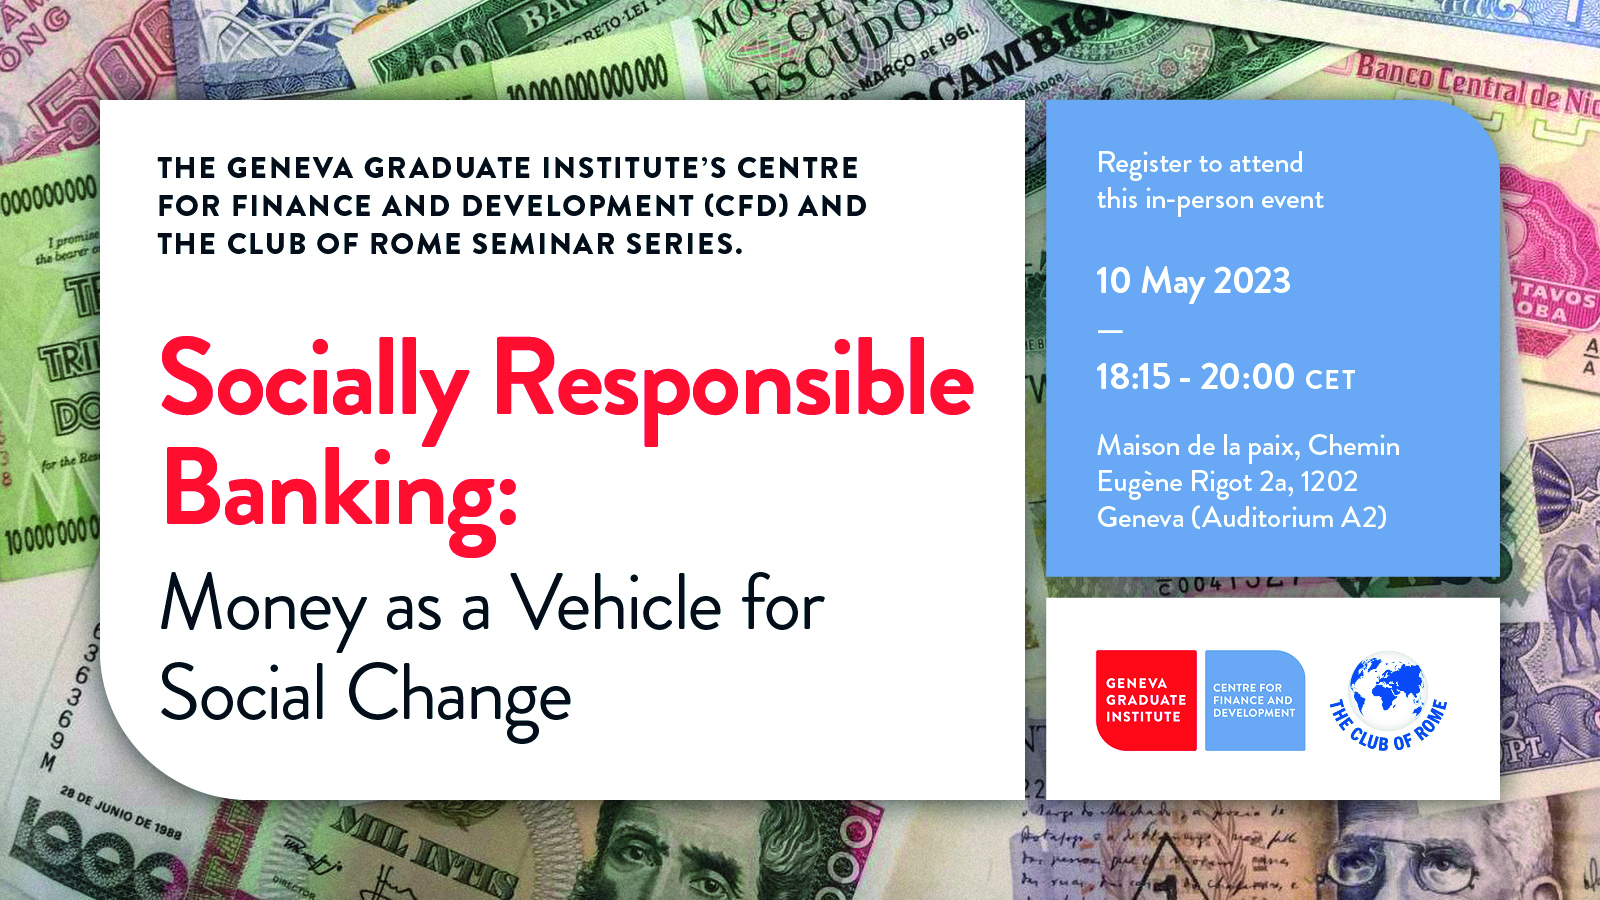 Socially responsible banking: Money as a vehicle for social change